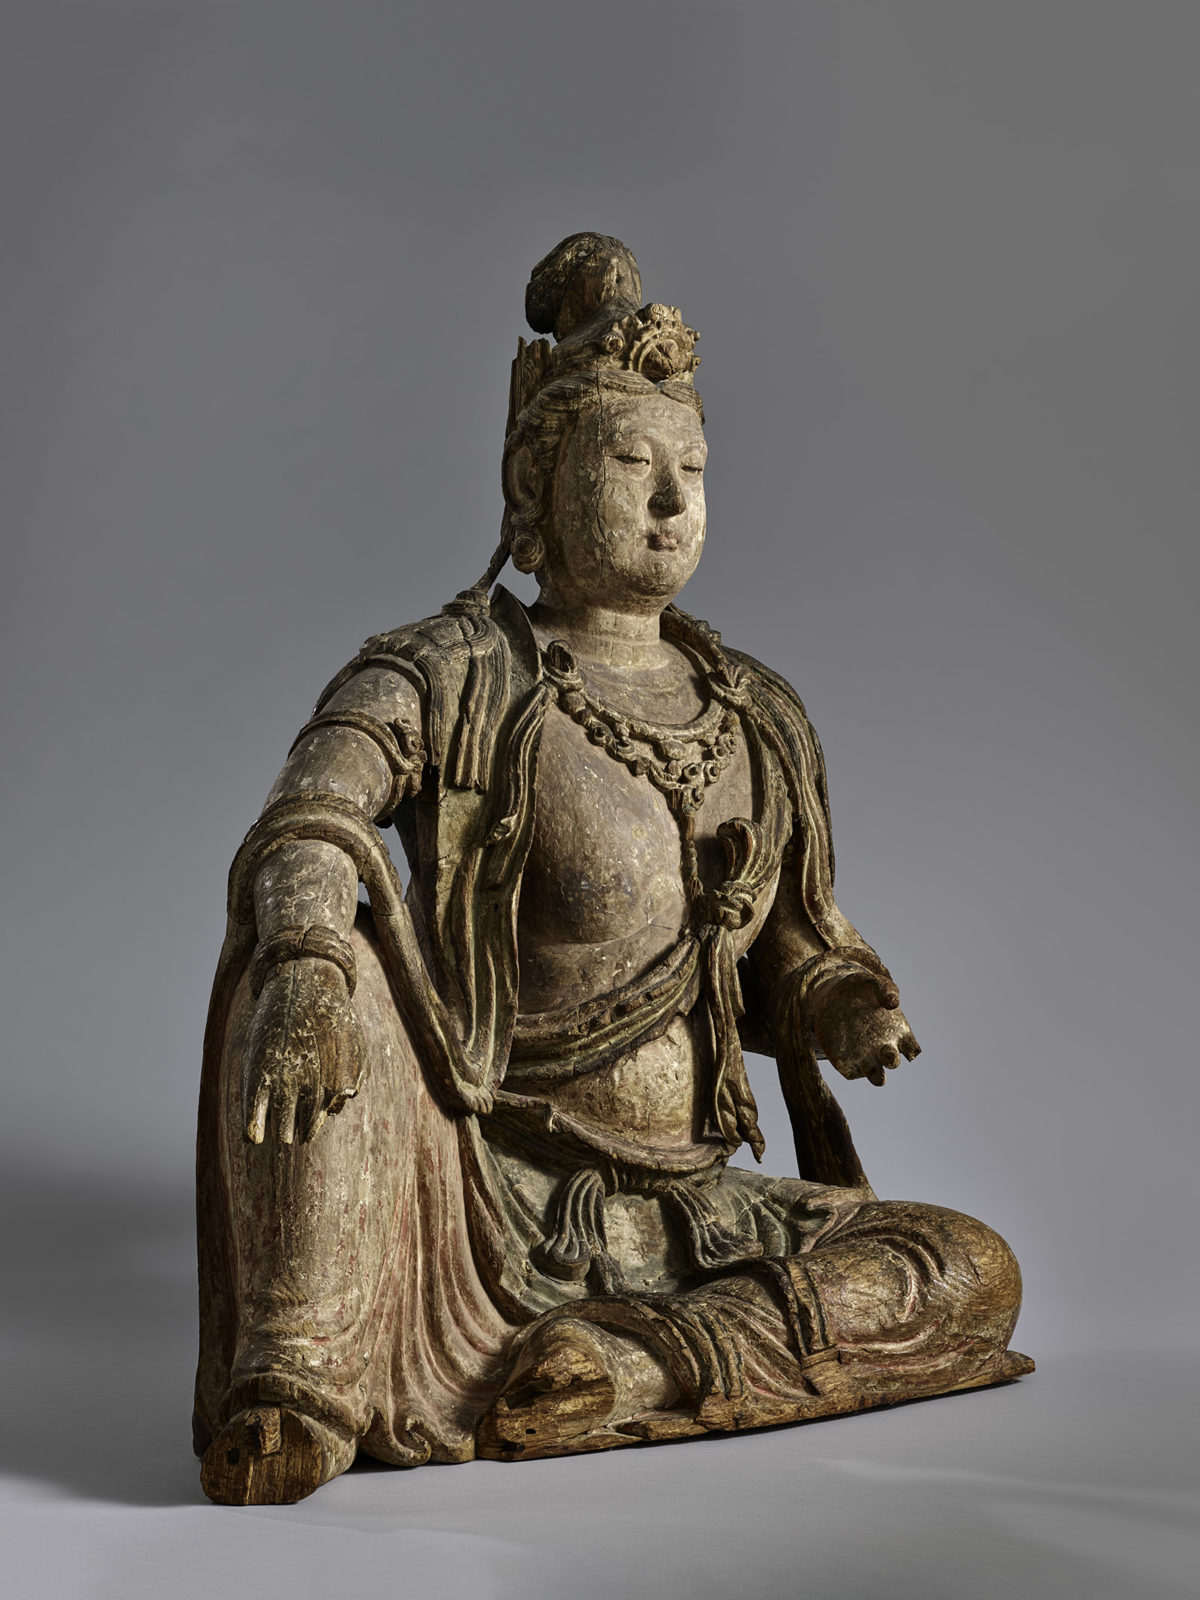 Partial profile view of a wooden statue of Guanyin.